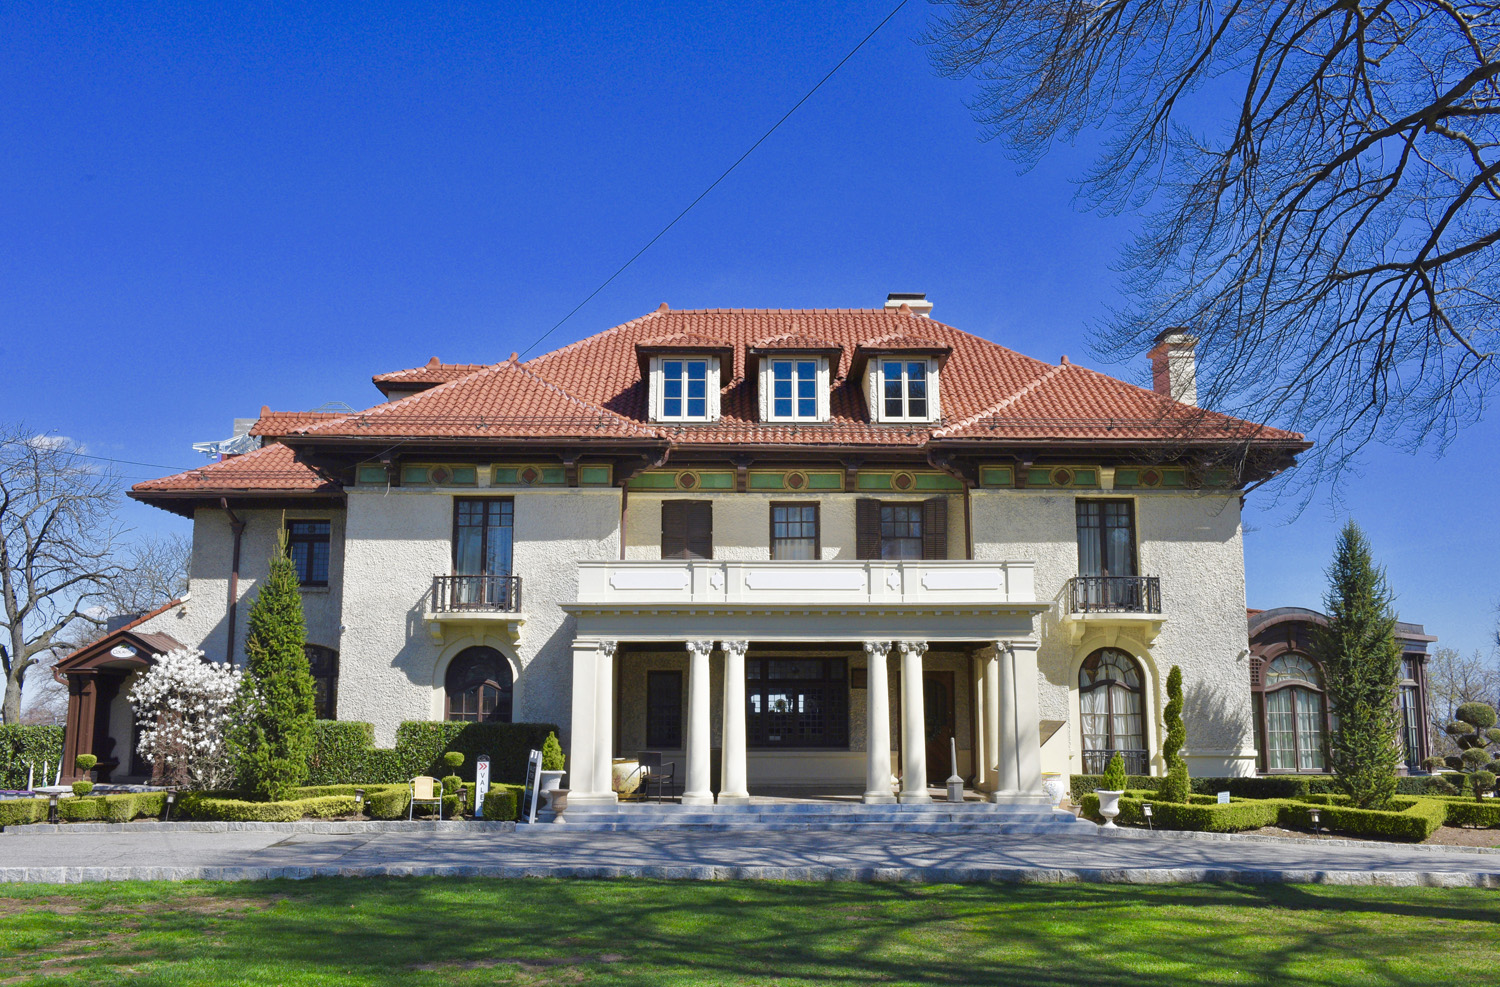 Casa Belvedere, The Italian Cultural Foundation on Grymes Hill, Staten Island